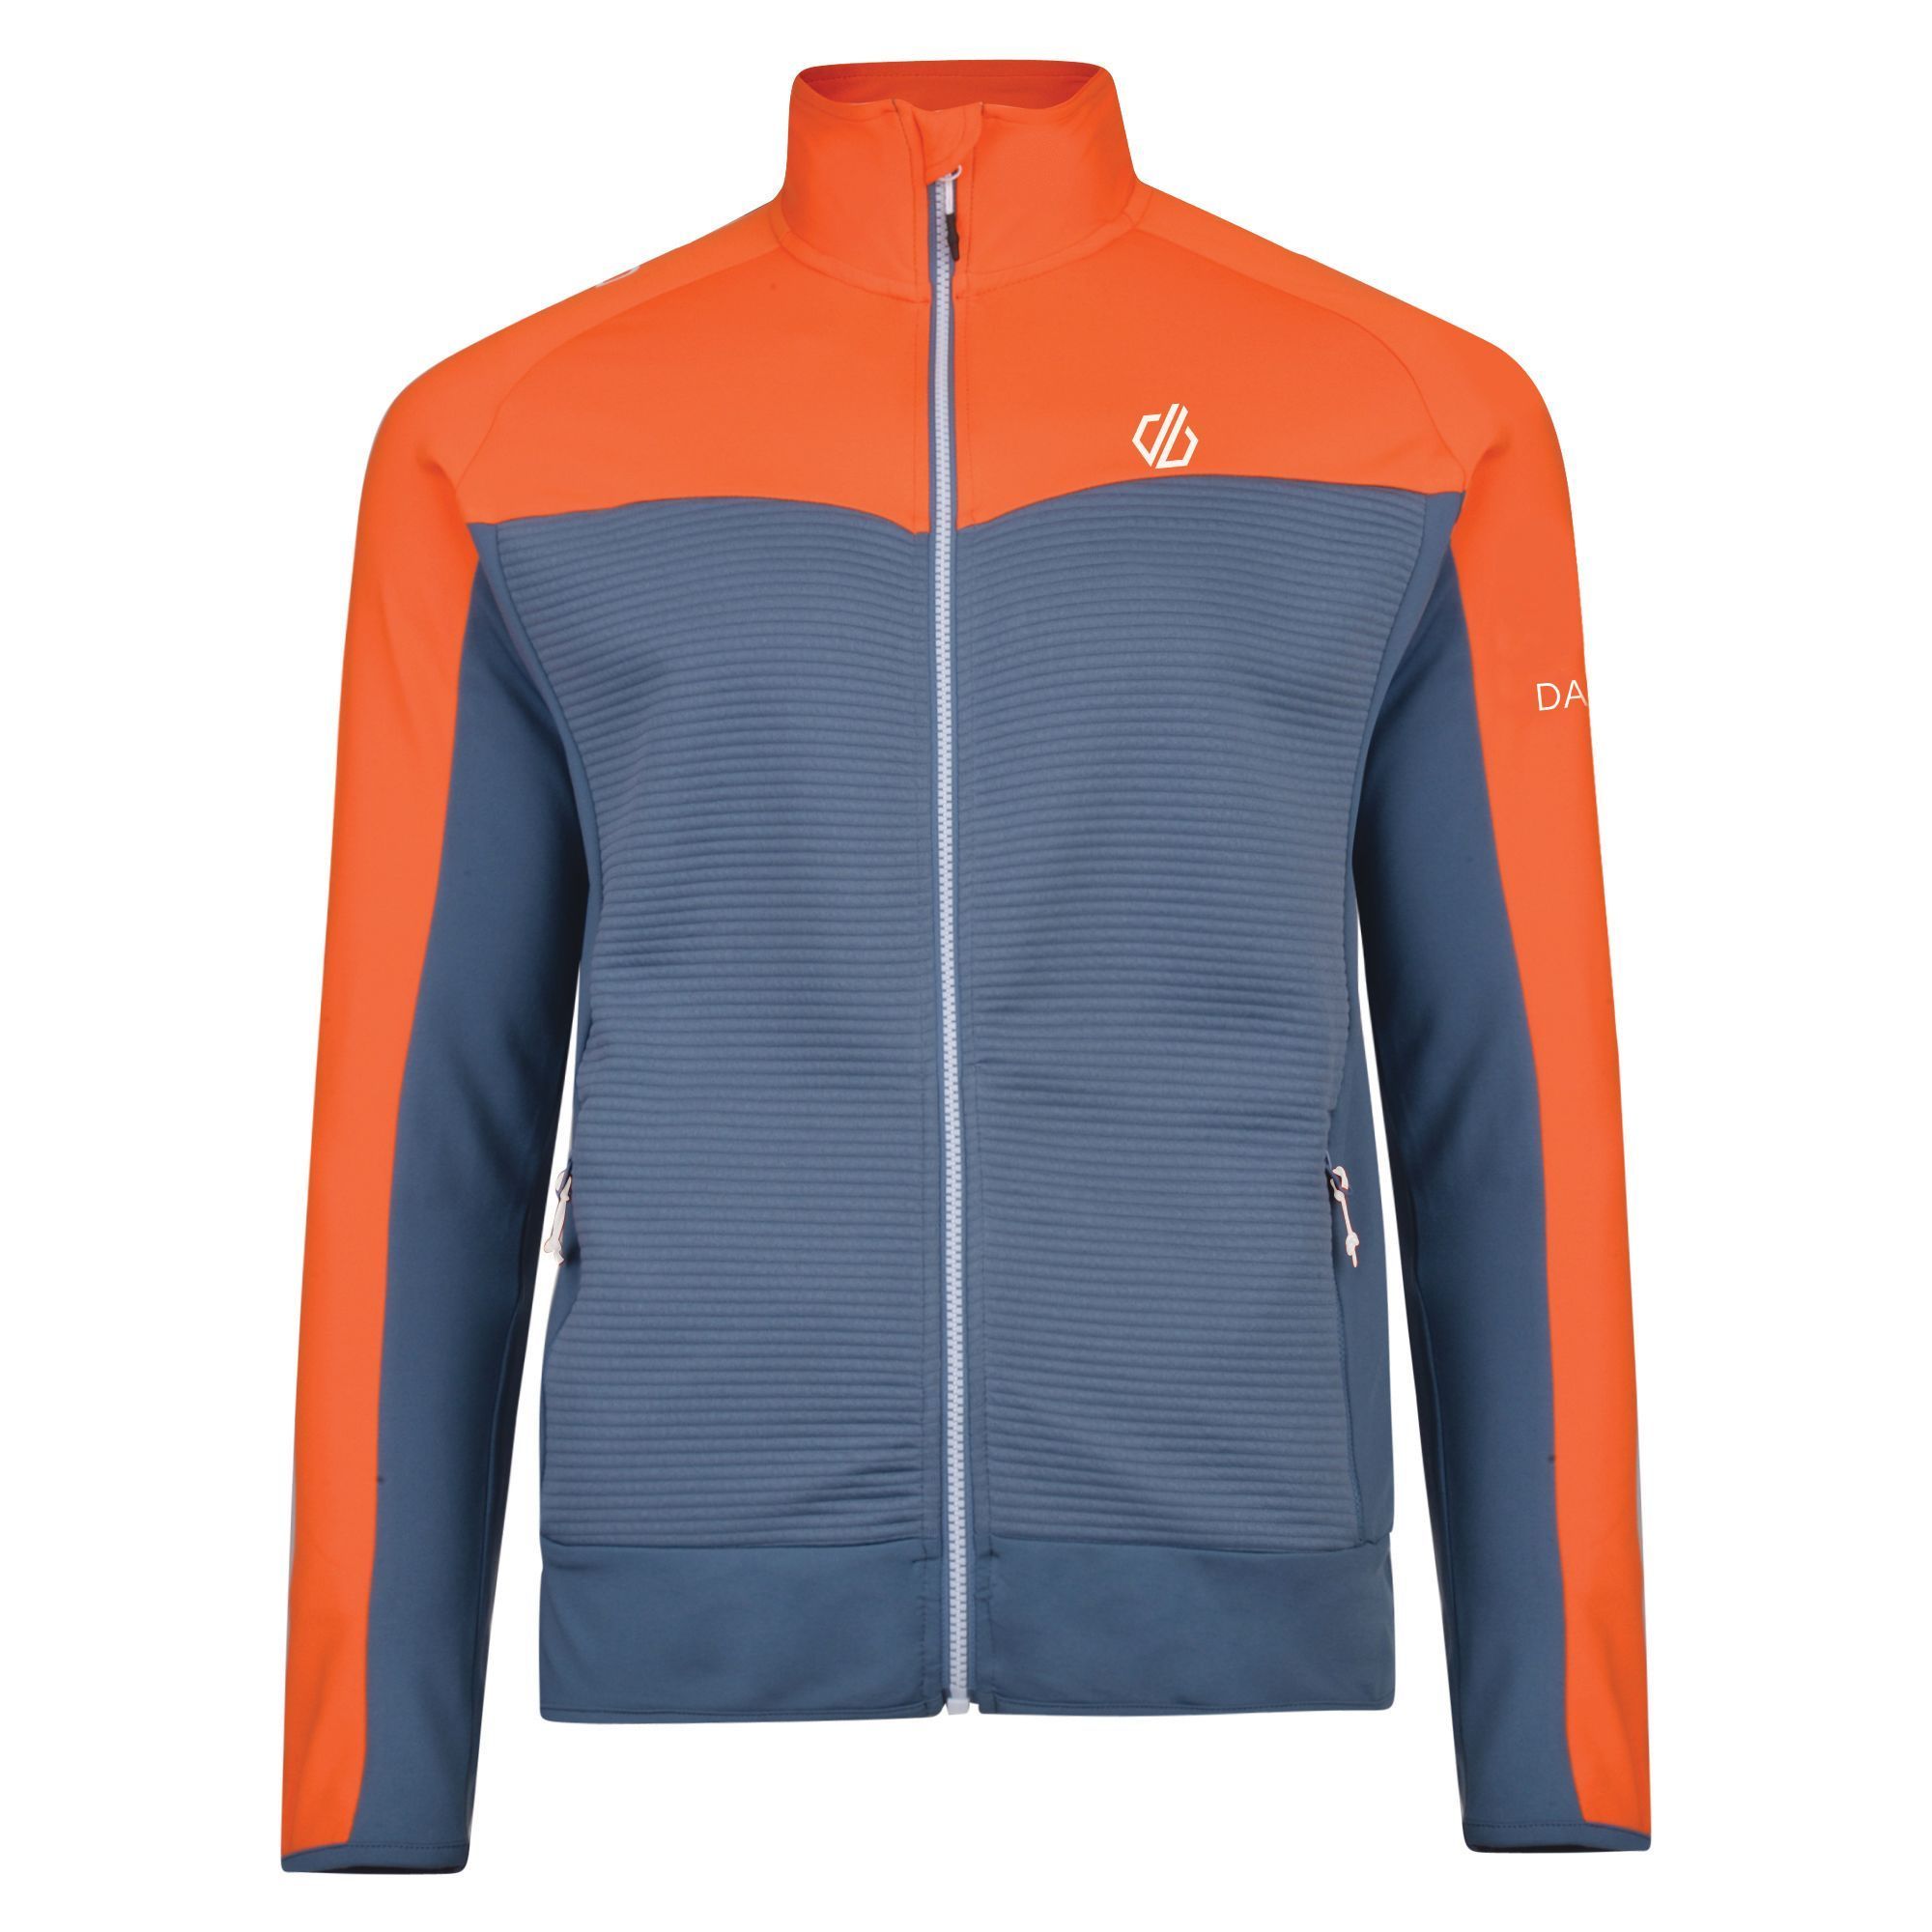 Polyester 97%, Elastane 3 %, Lightweight Ilus Core warm backed knitted stretch fabric with marl stripe mix. Quick drying. Inner zip & chin guard. 2 x lower zip pockets. Stretch binding to cuffs and hem.